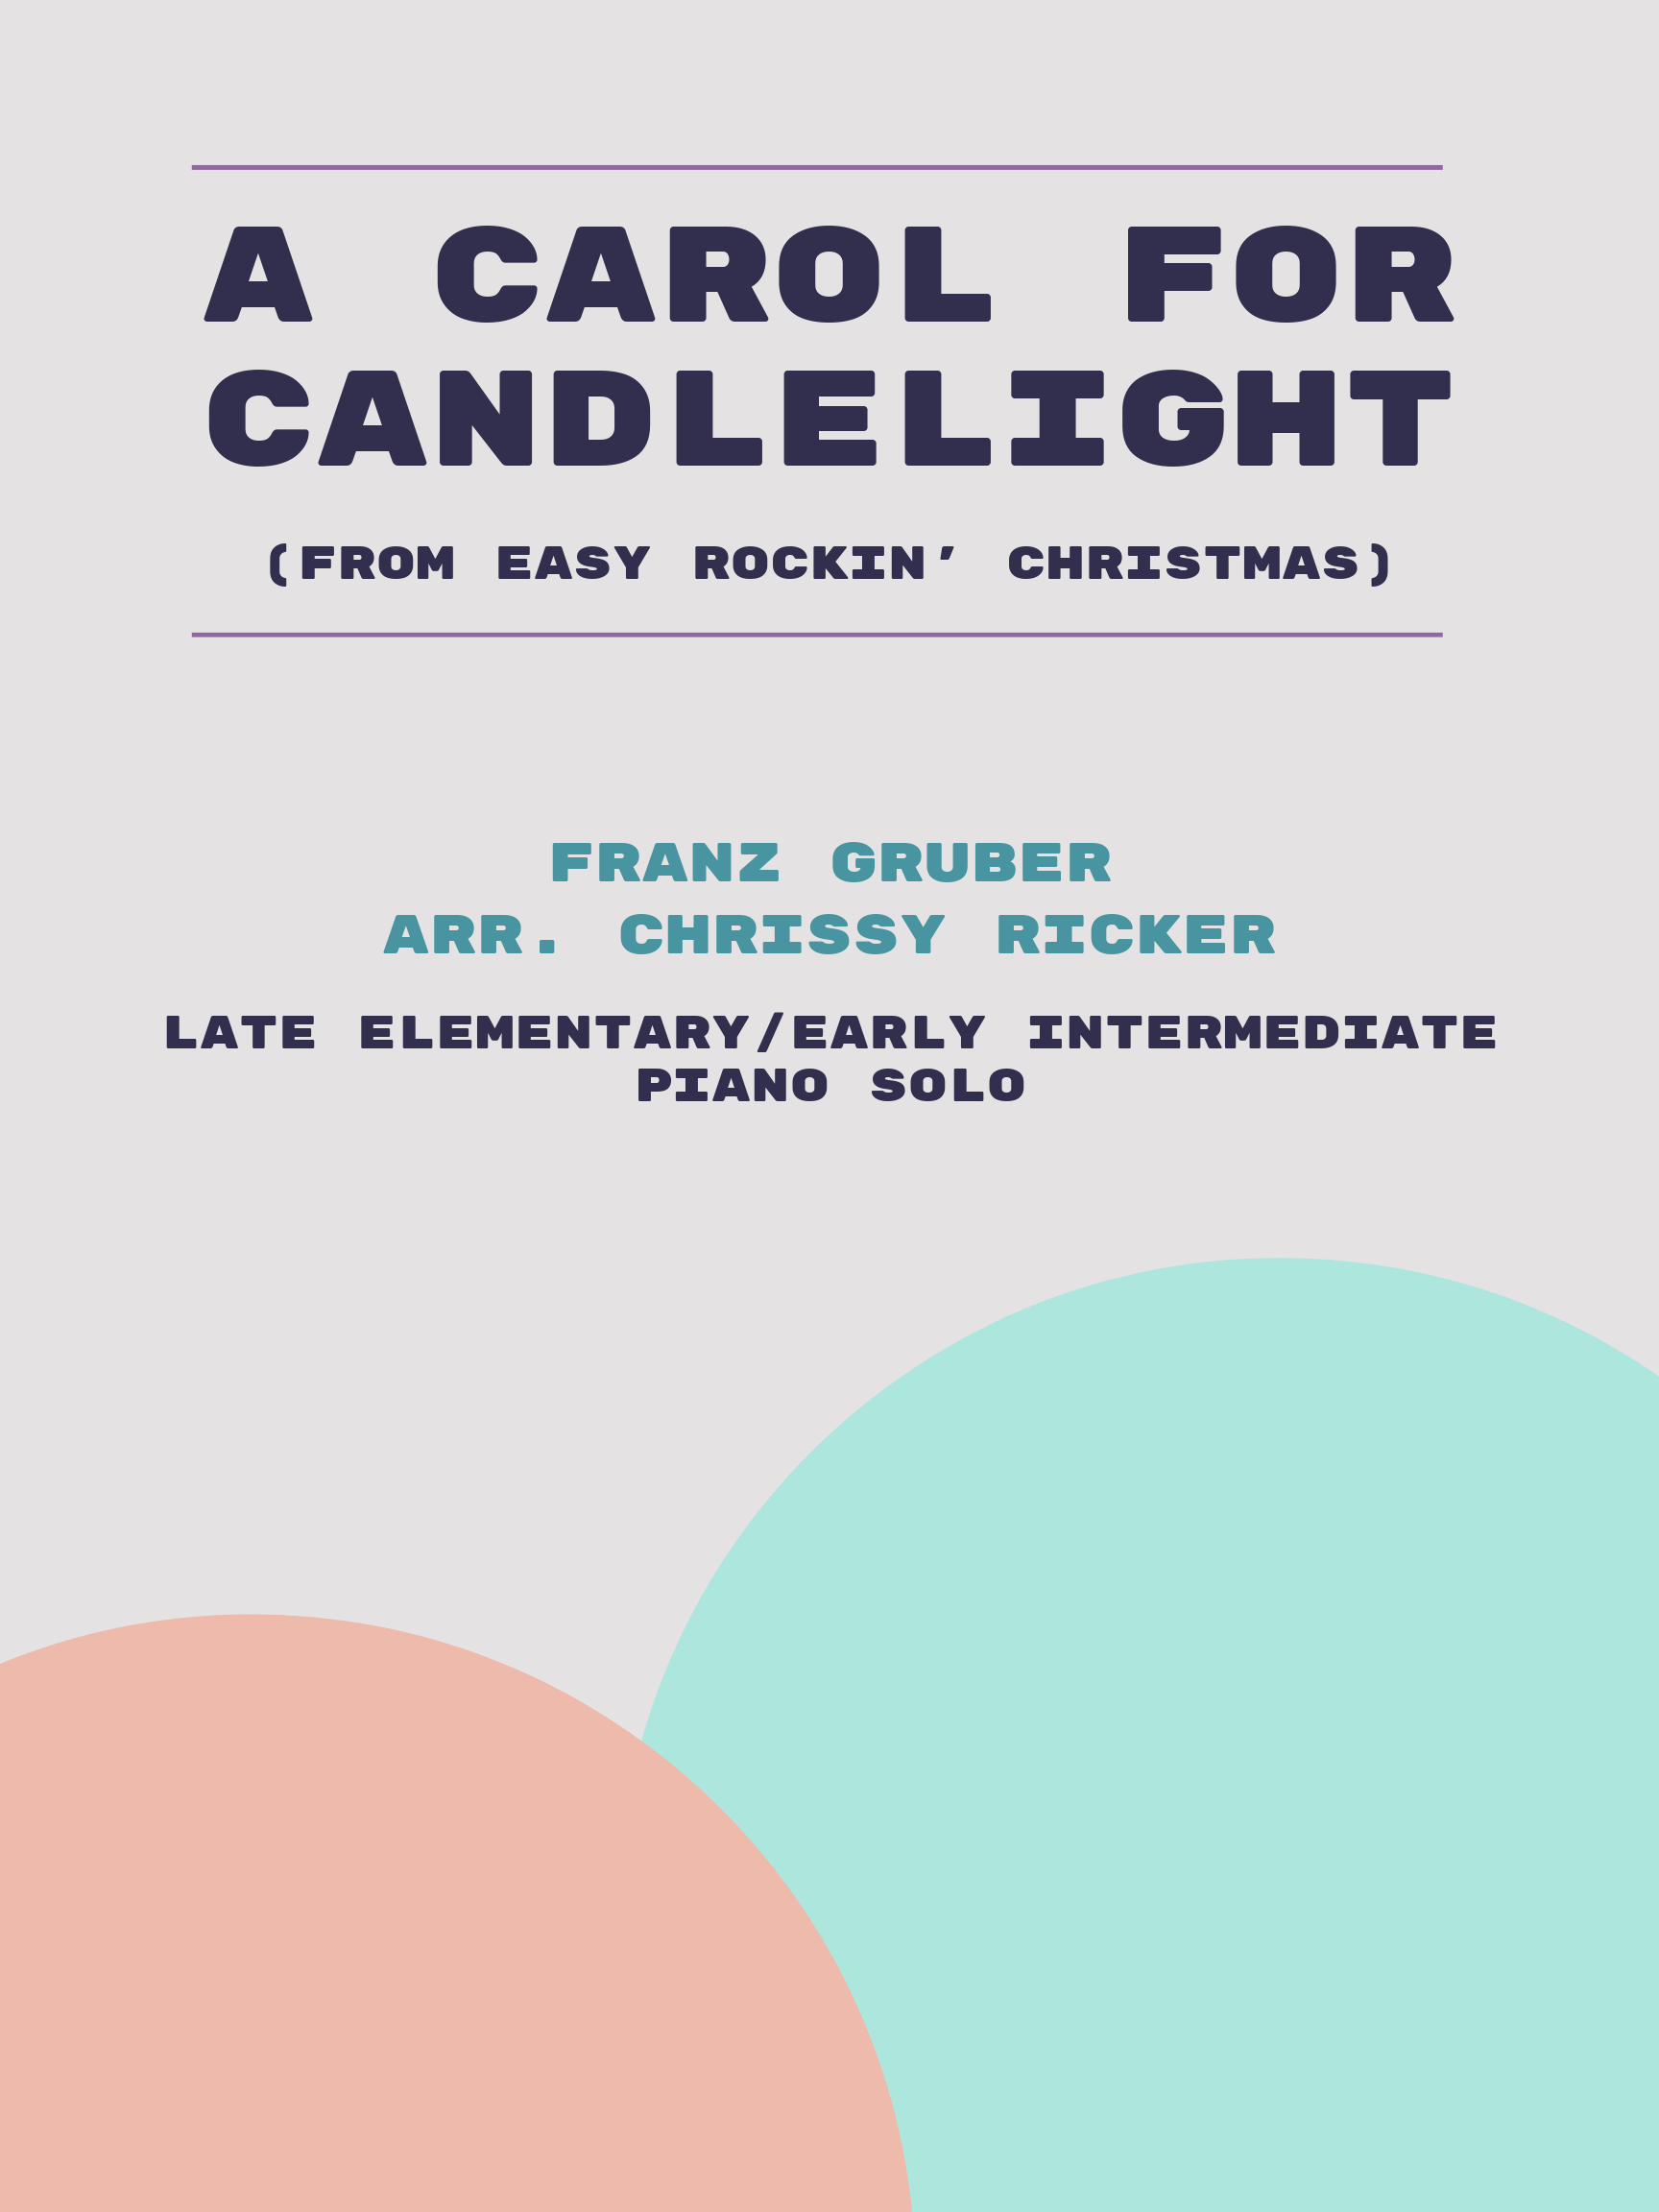 A Carol for Candlelight by Franz Gruber